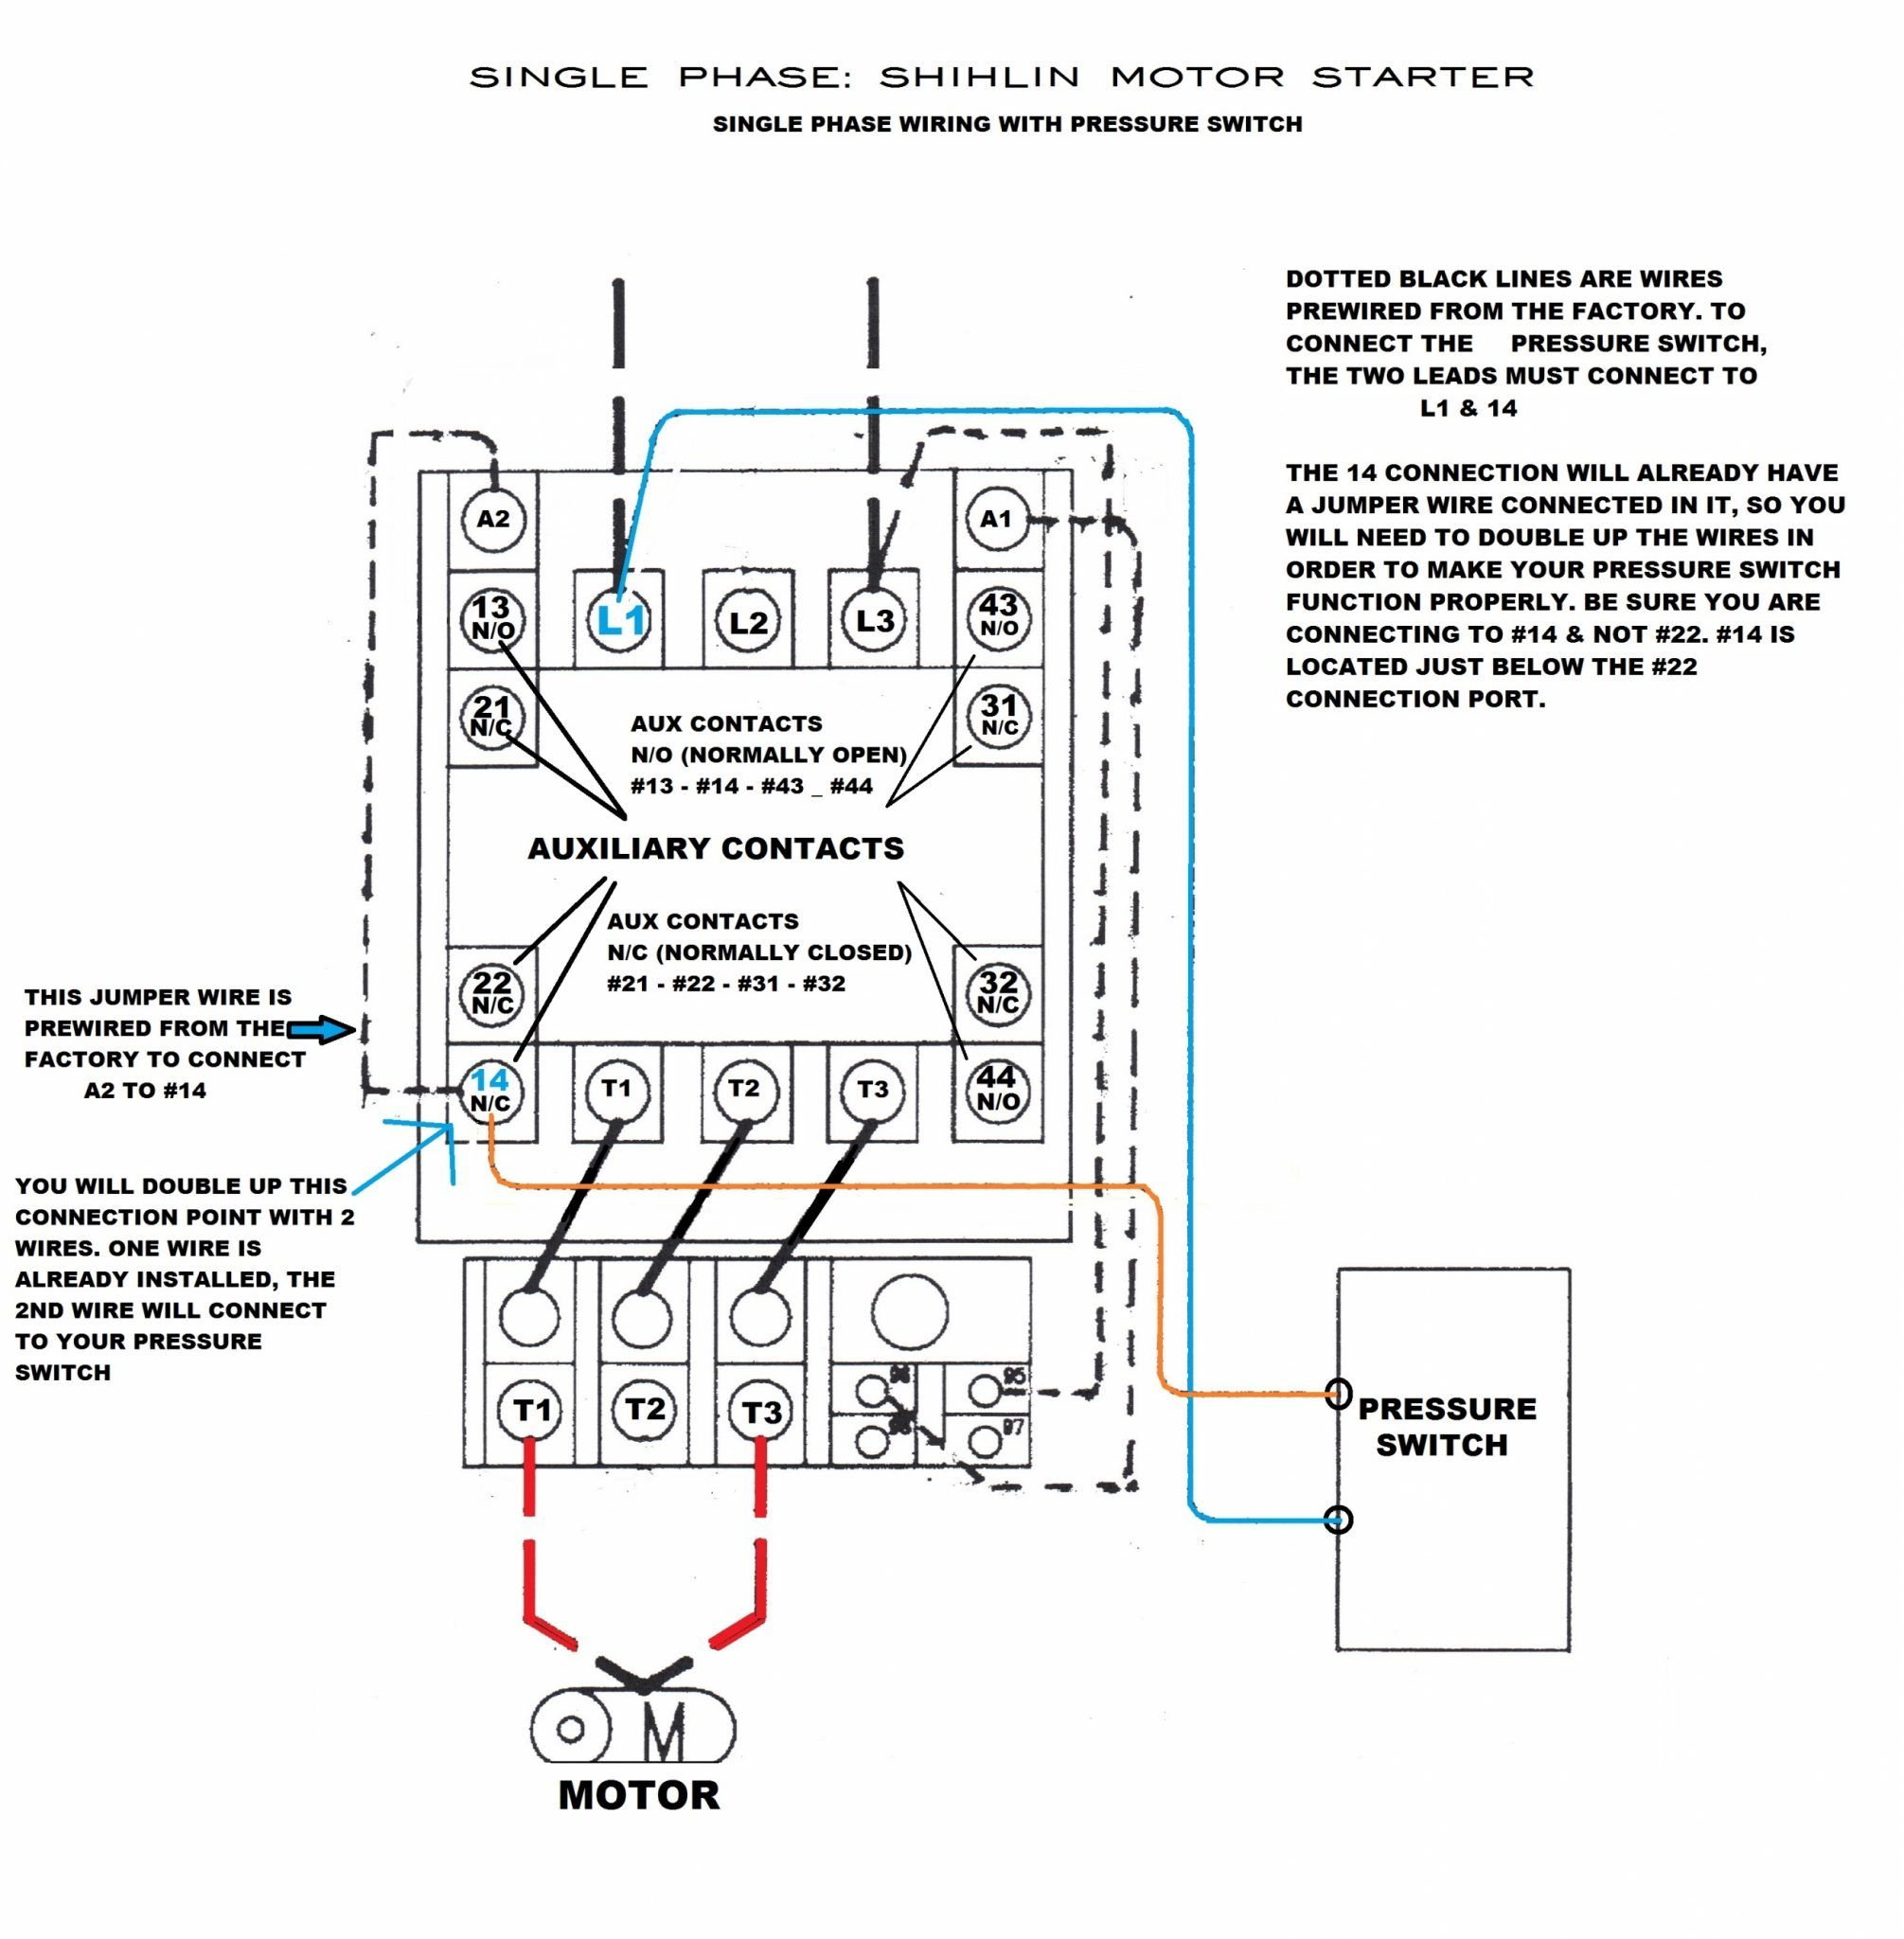 Square D Well Pump Pressure Switch Wiring Diagram | Welcome To Be - Square D Well Pump Pressure Switch Wiring Diagram